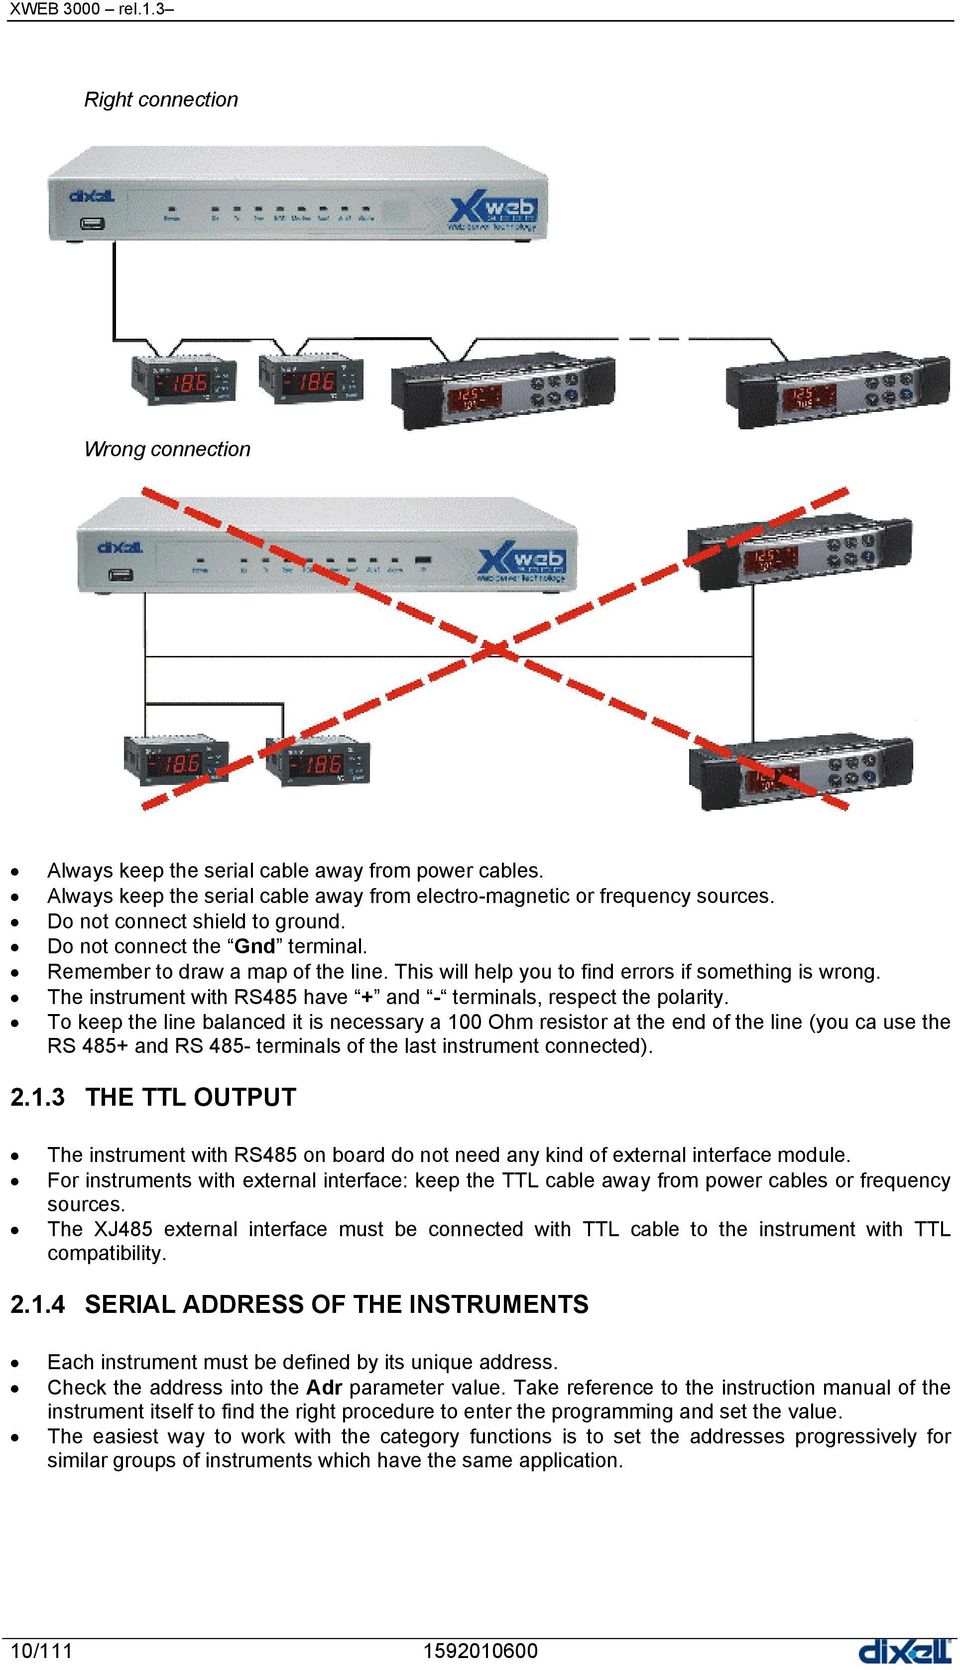 To keep the line balanced it is necessary a 100 Ohm resistor at the end of the line (you ca use the RS 485+ and RS 485- terminals of the last instrument connected). 2.1.3 THE TTL OUTPUT The instrument with RS485 on board do not need any kind of external interface module.